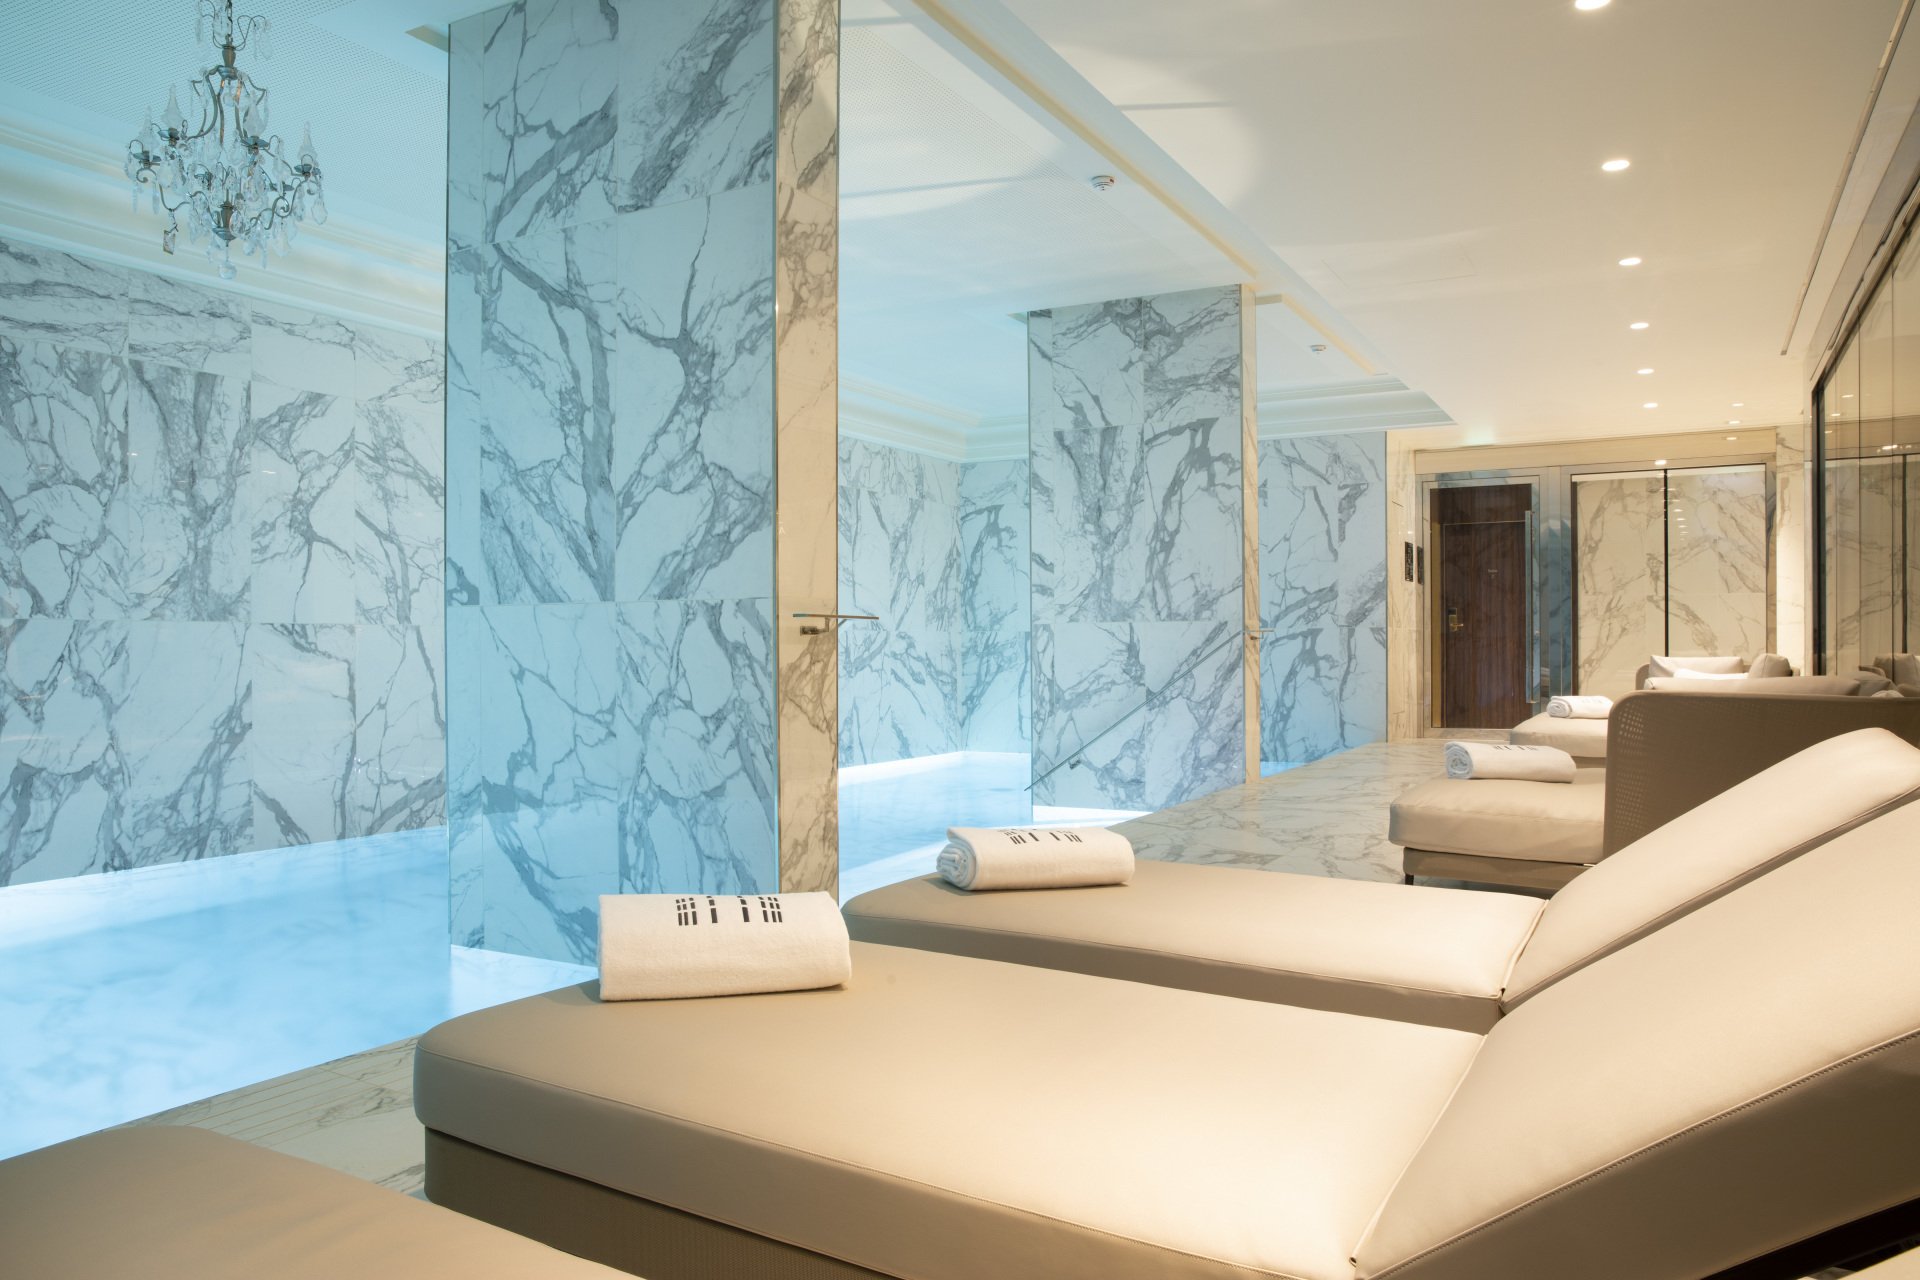 Hotel and Spa Le Damantin Paris designed by the interior design studio jean-philippe nuel - spa - bed - rest well-being pool marble